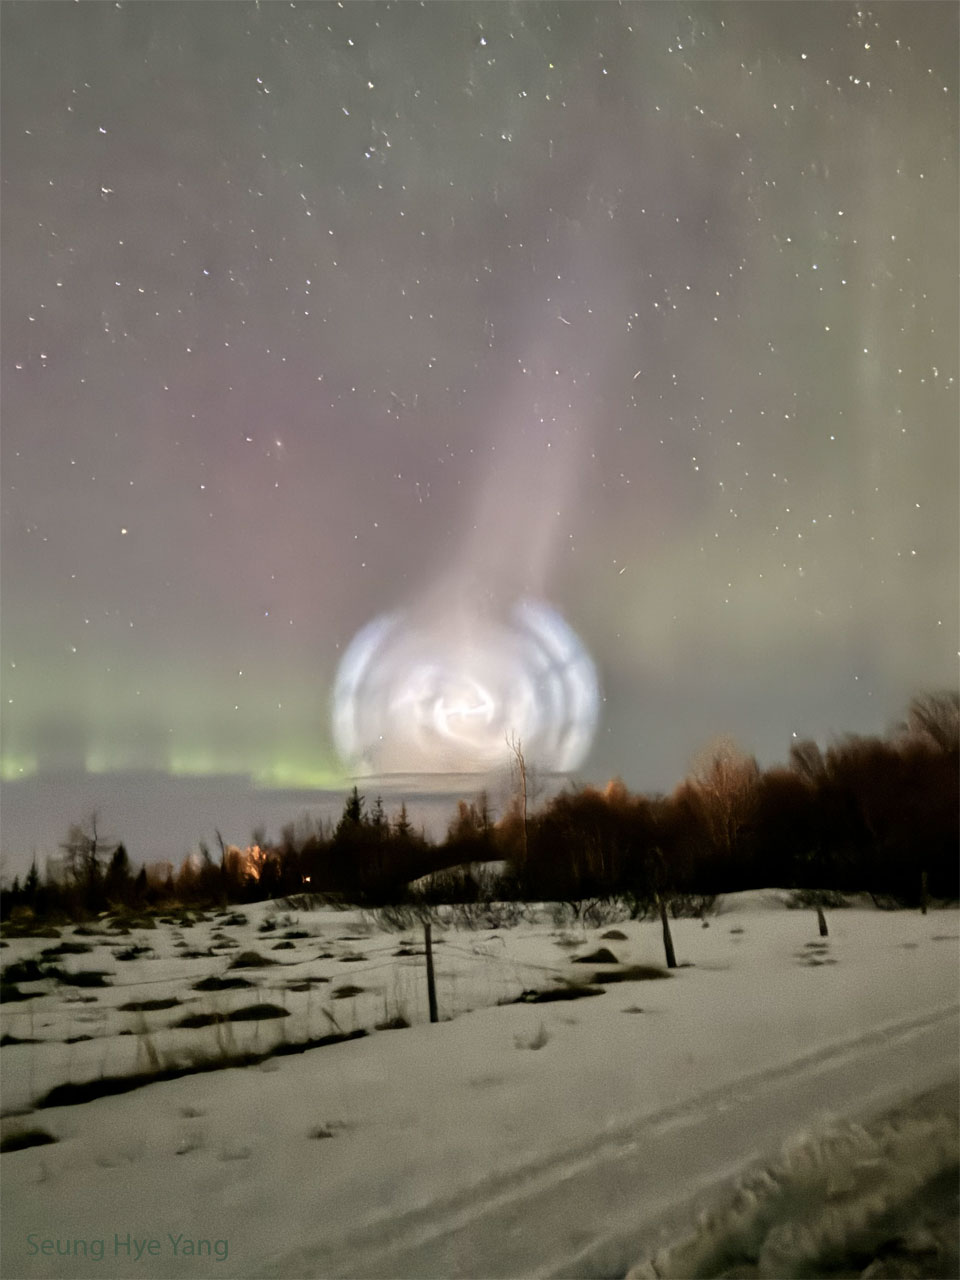 A field of snow is shown, lined with trees along the back.
Above the horizon is an unusual white spiral cloud. 
Stars dot the background, and faint green and red aurora
are also visible. 
Więcej szczegółowych informacji w opisie poniżej.